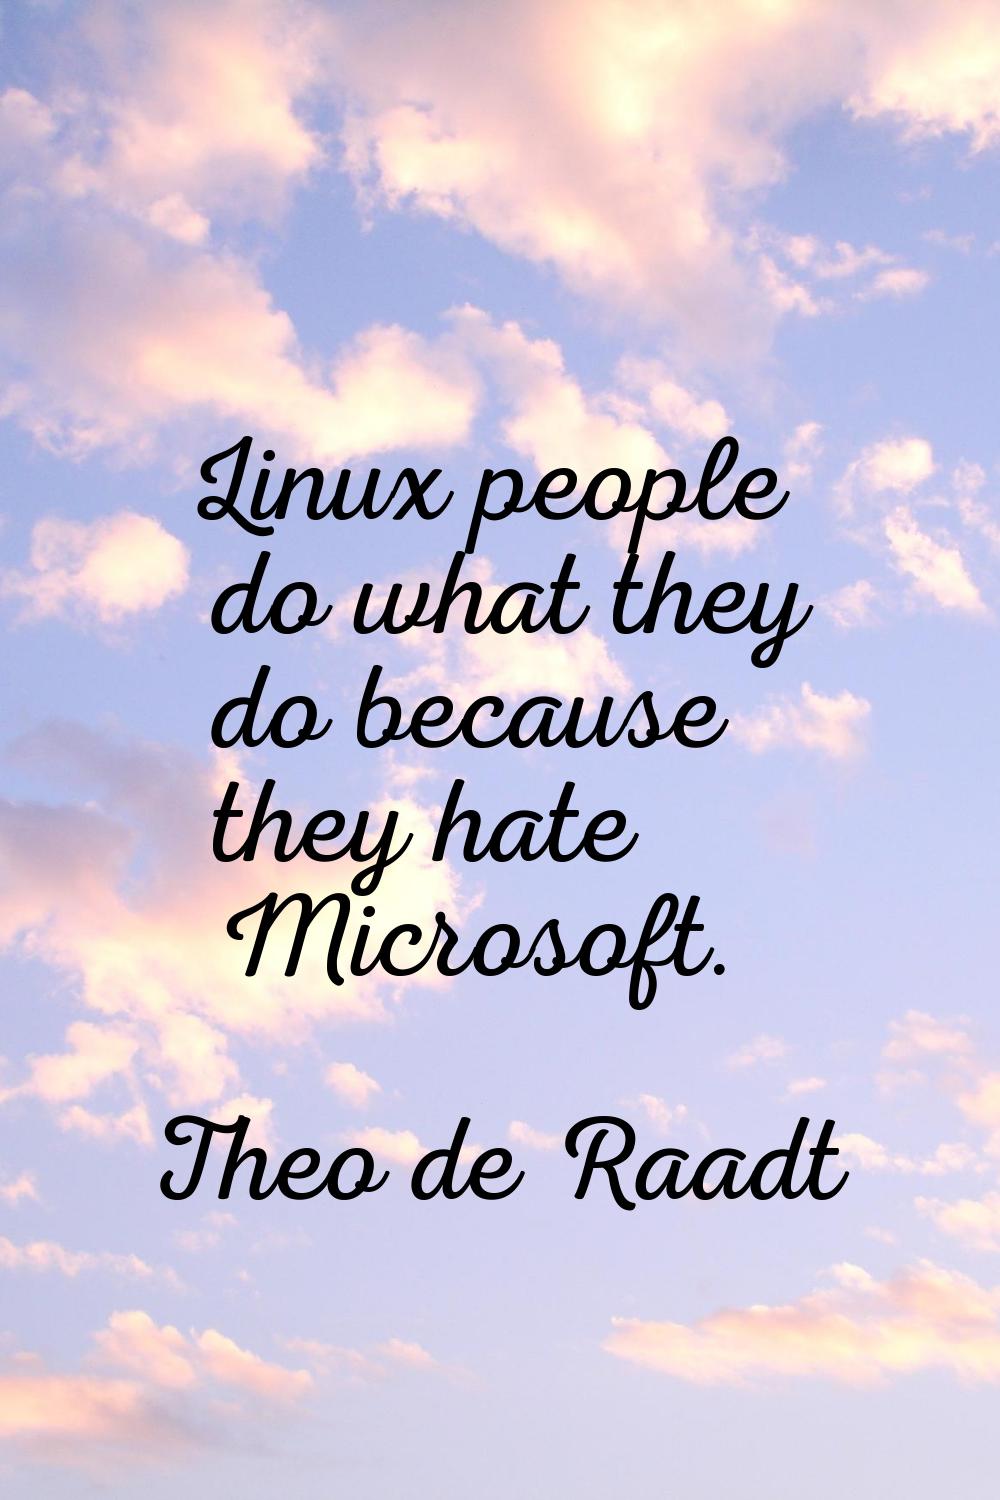 Linux people do what they do because they hate Microsoft.